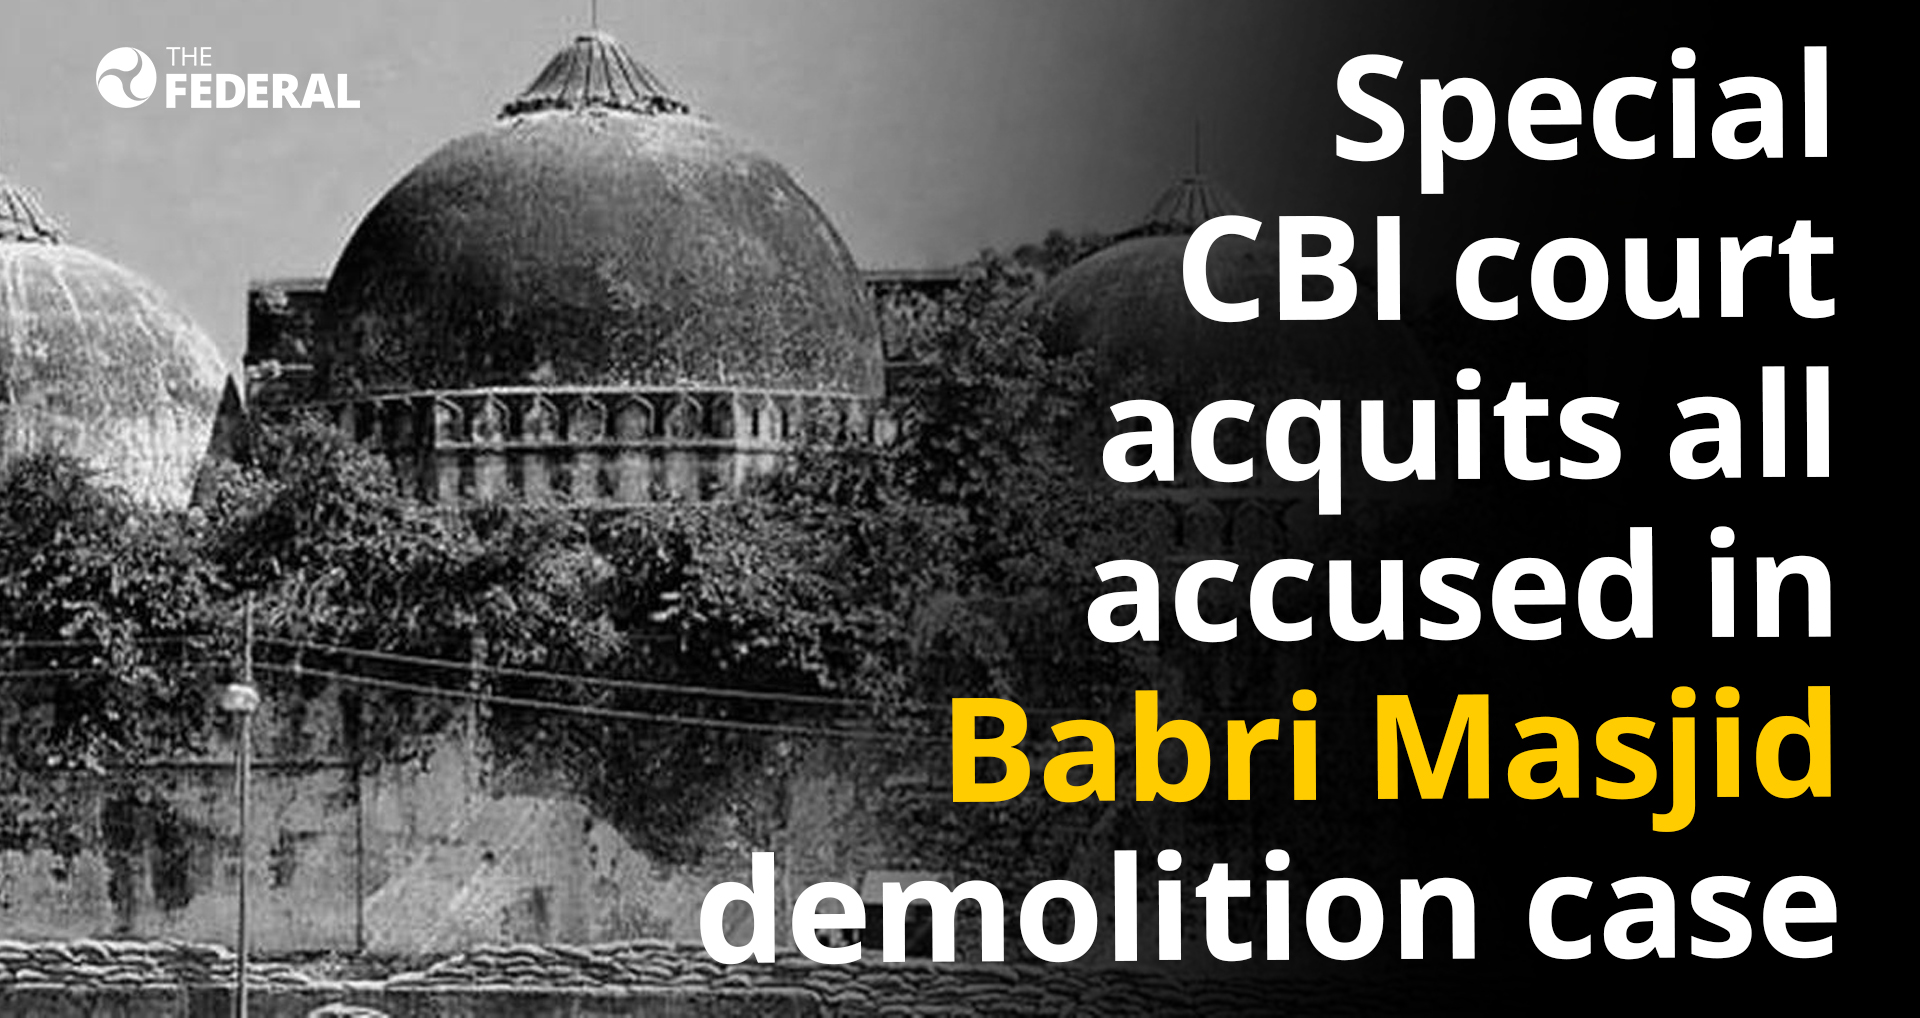 Special CBI court acquits all accused in Babri Masjid demolition case